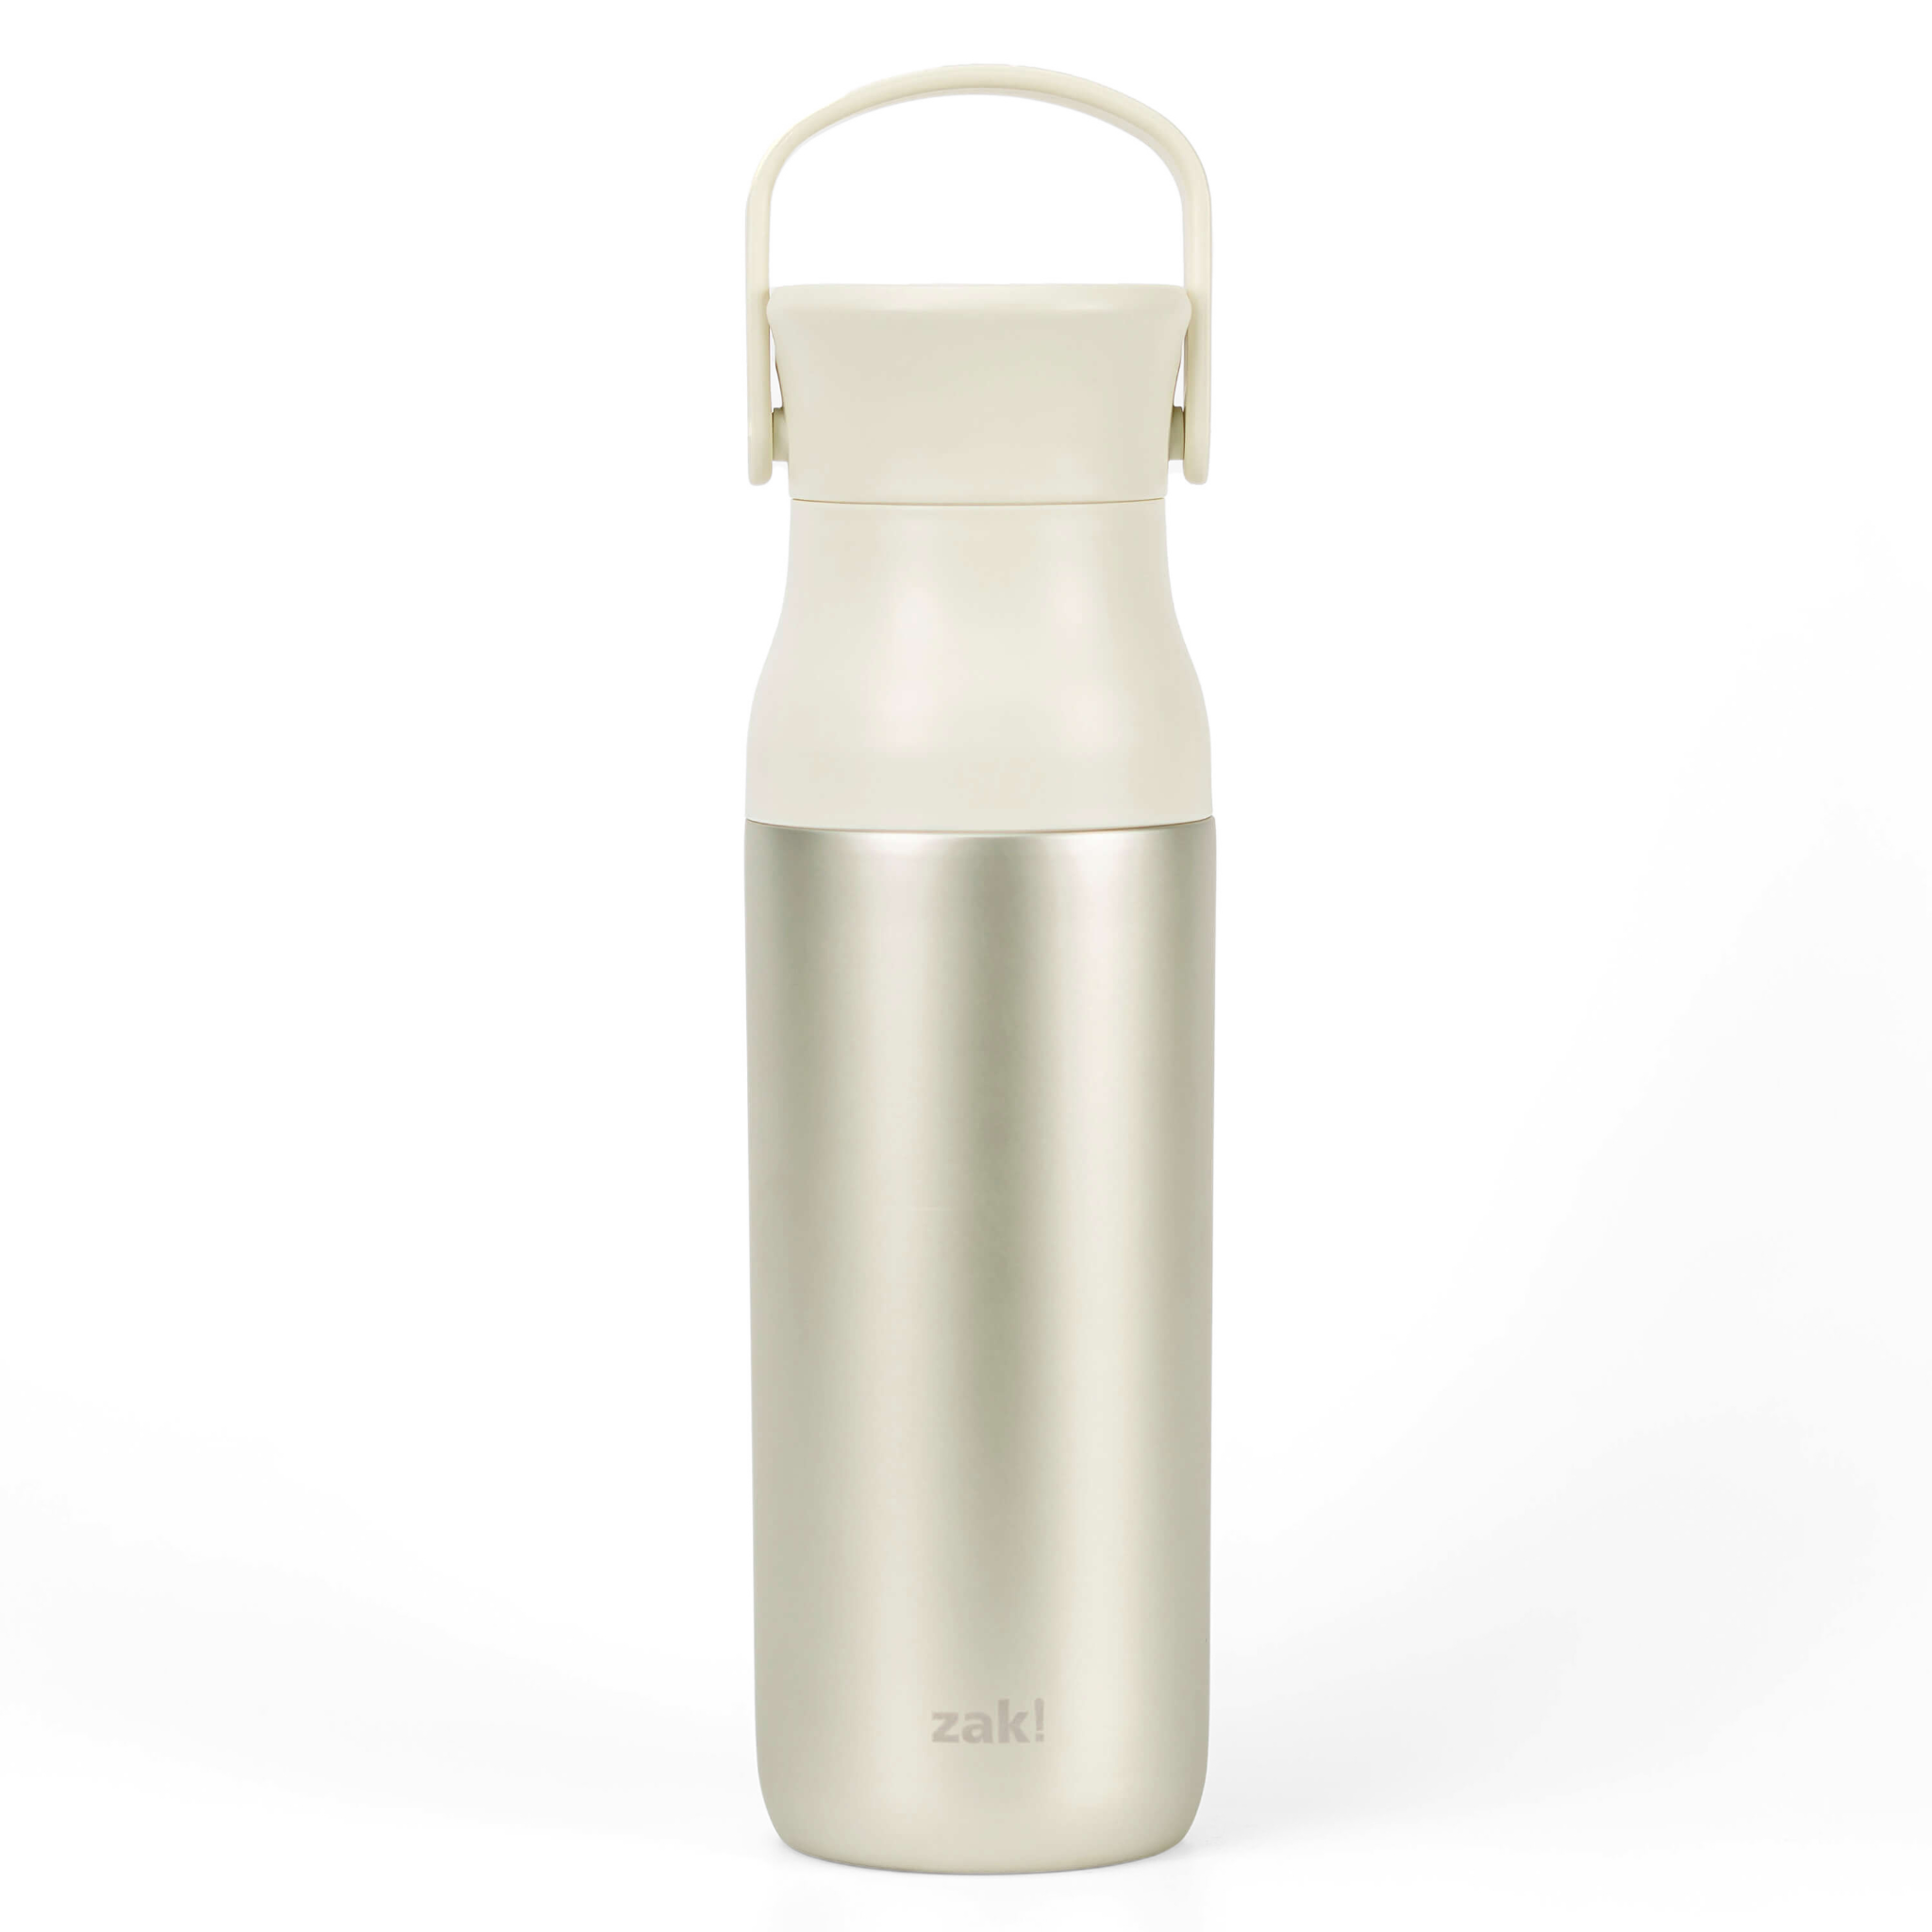 Zak Designs 24 Ounce Antimicrobial Stainless Steel Water Bottle, Charcoal